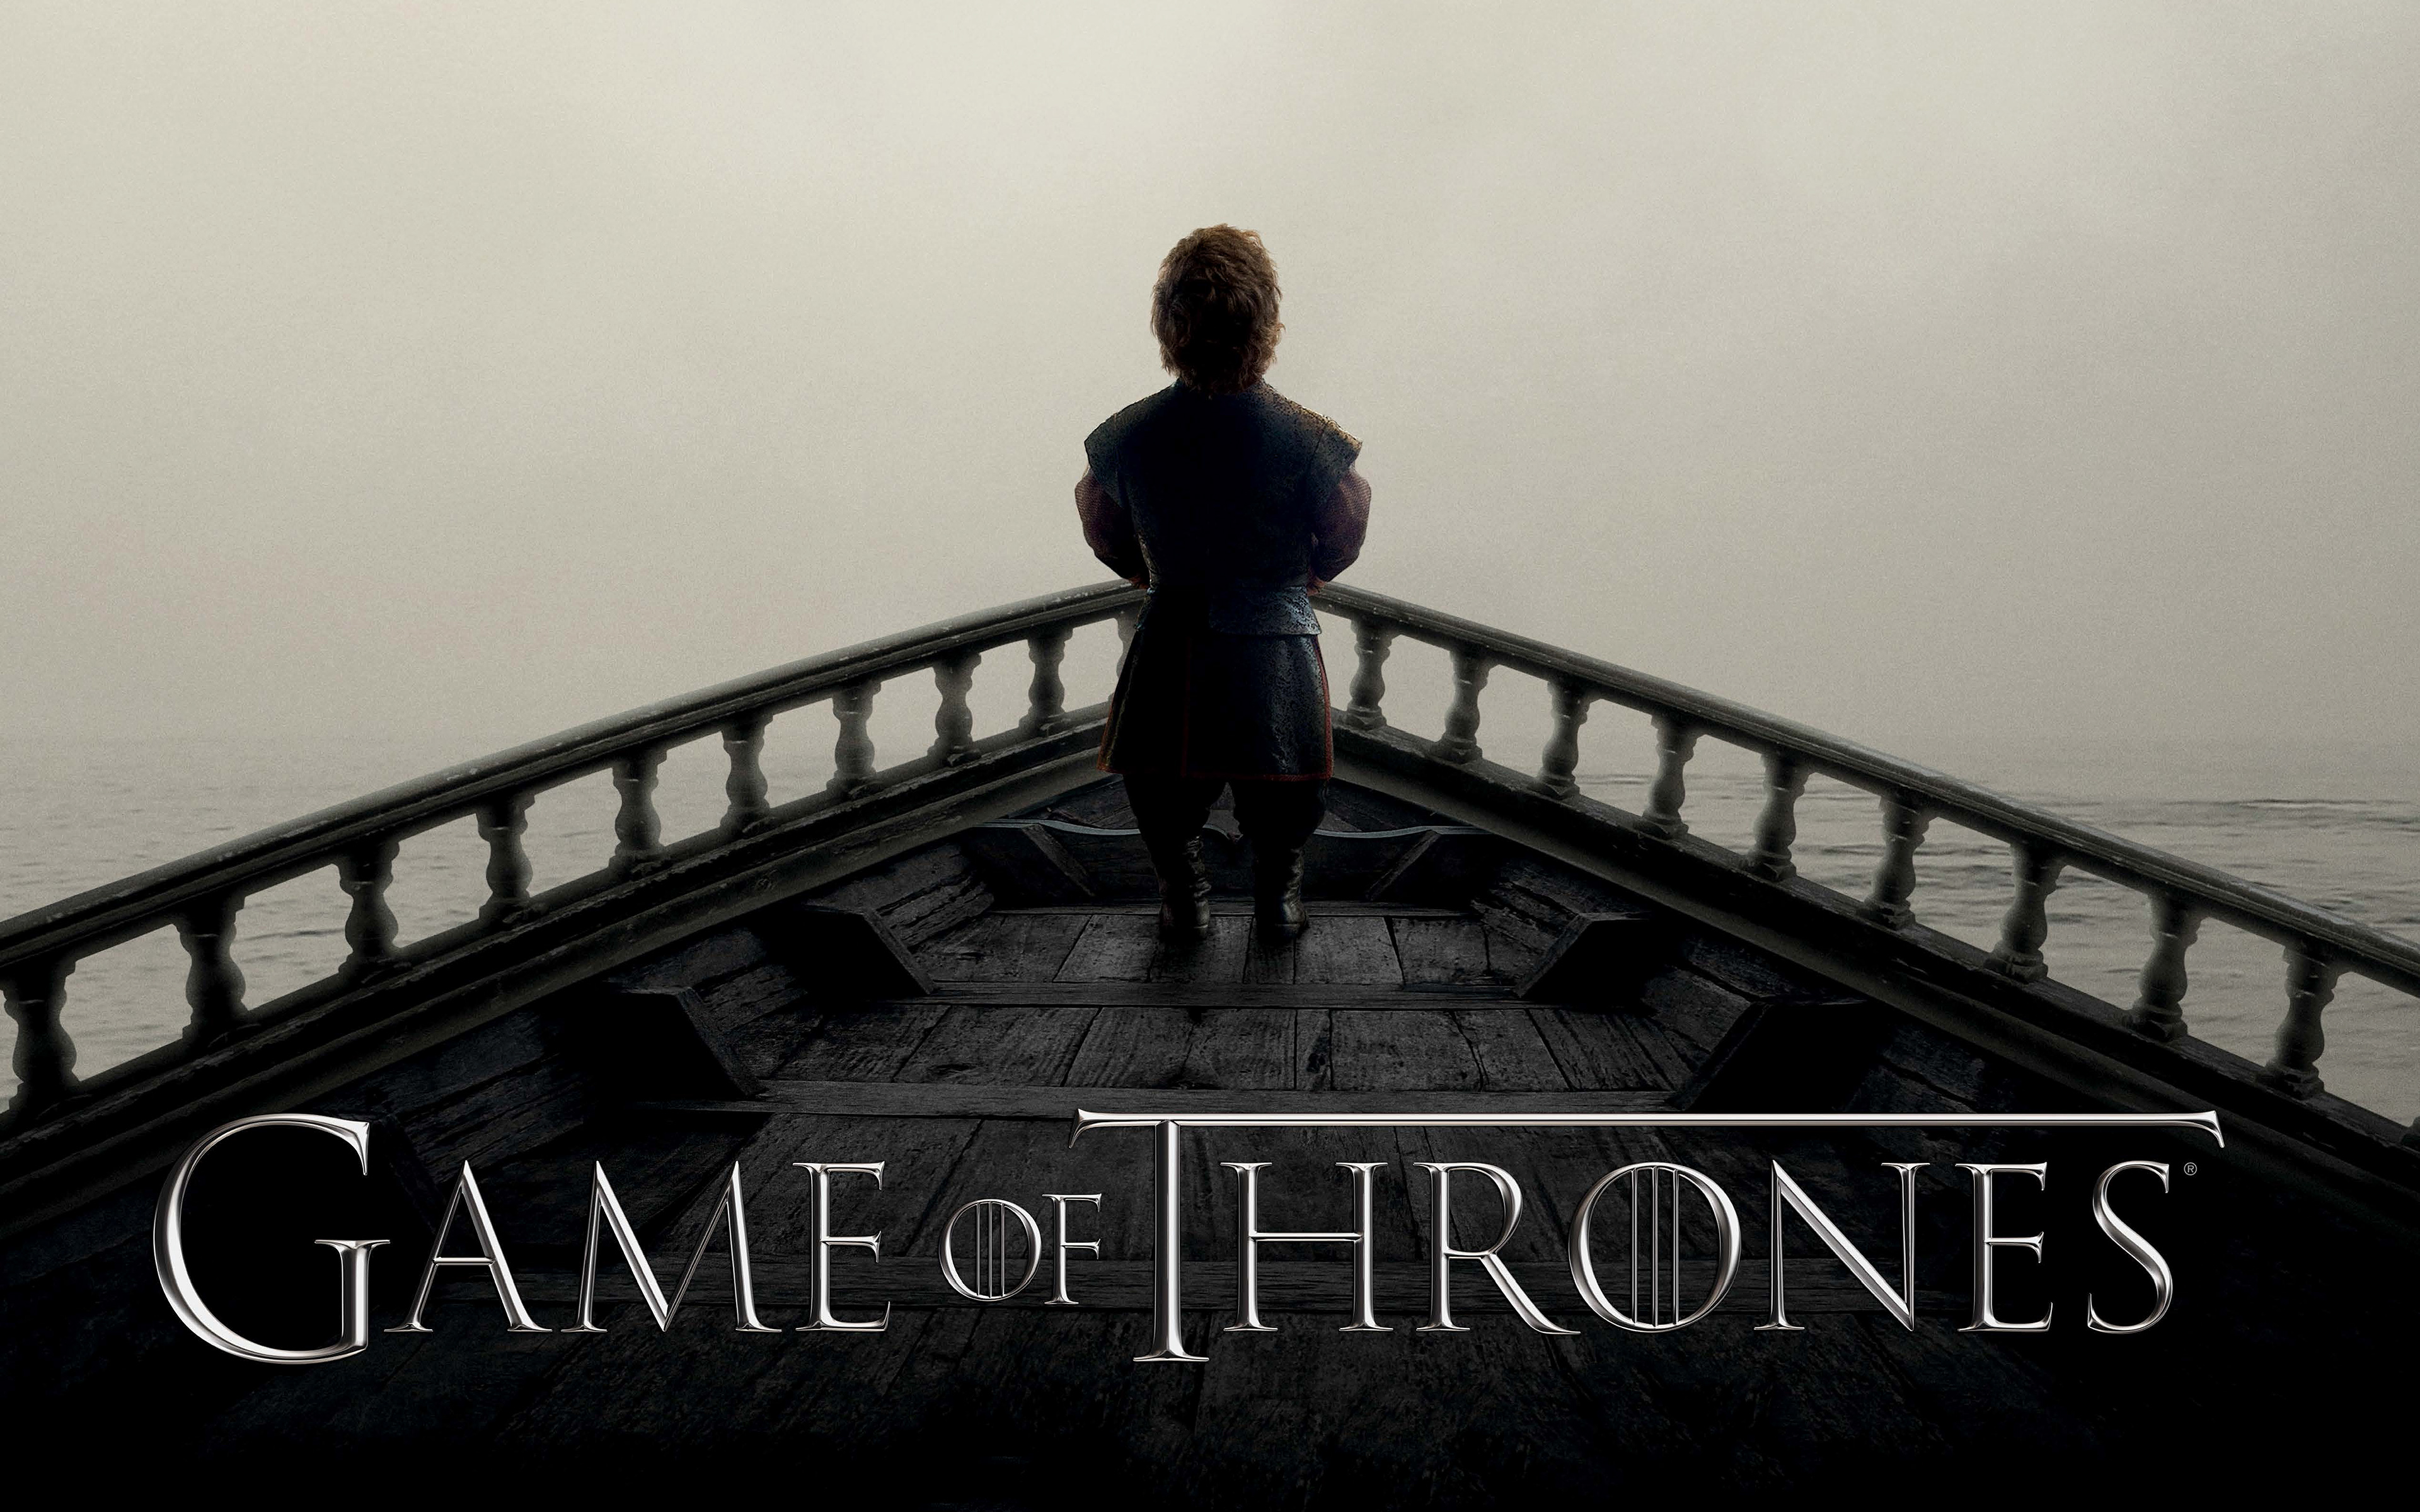 Game of Thrones wallpaper HD free download 